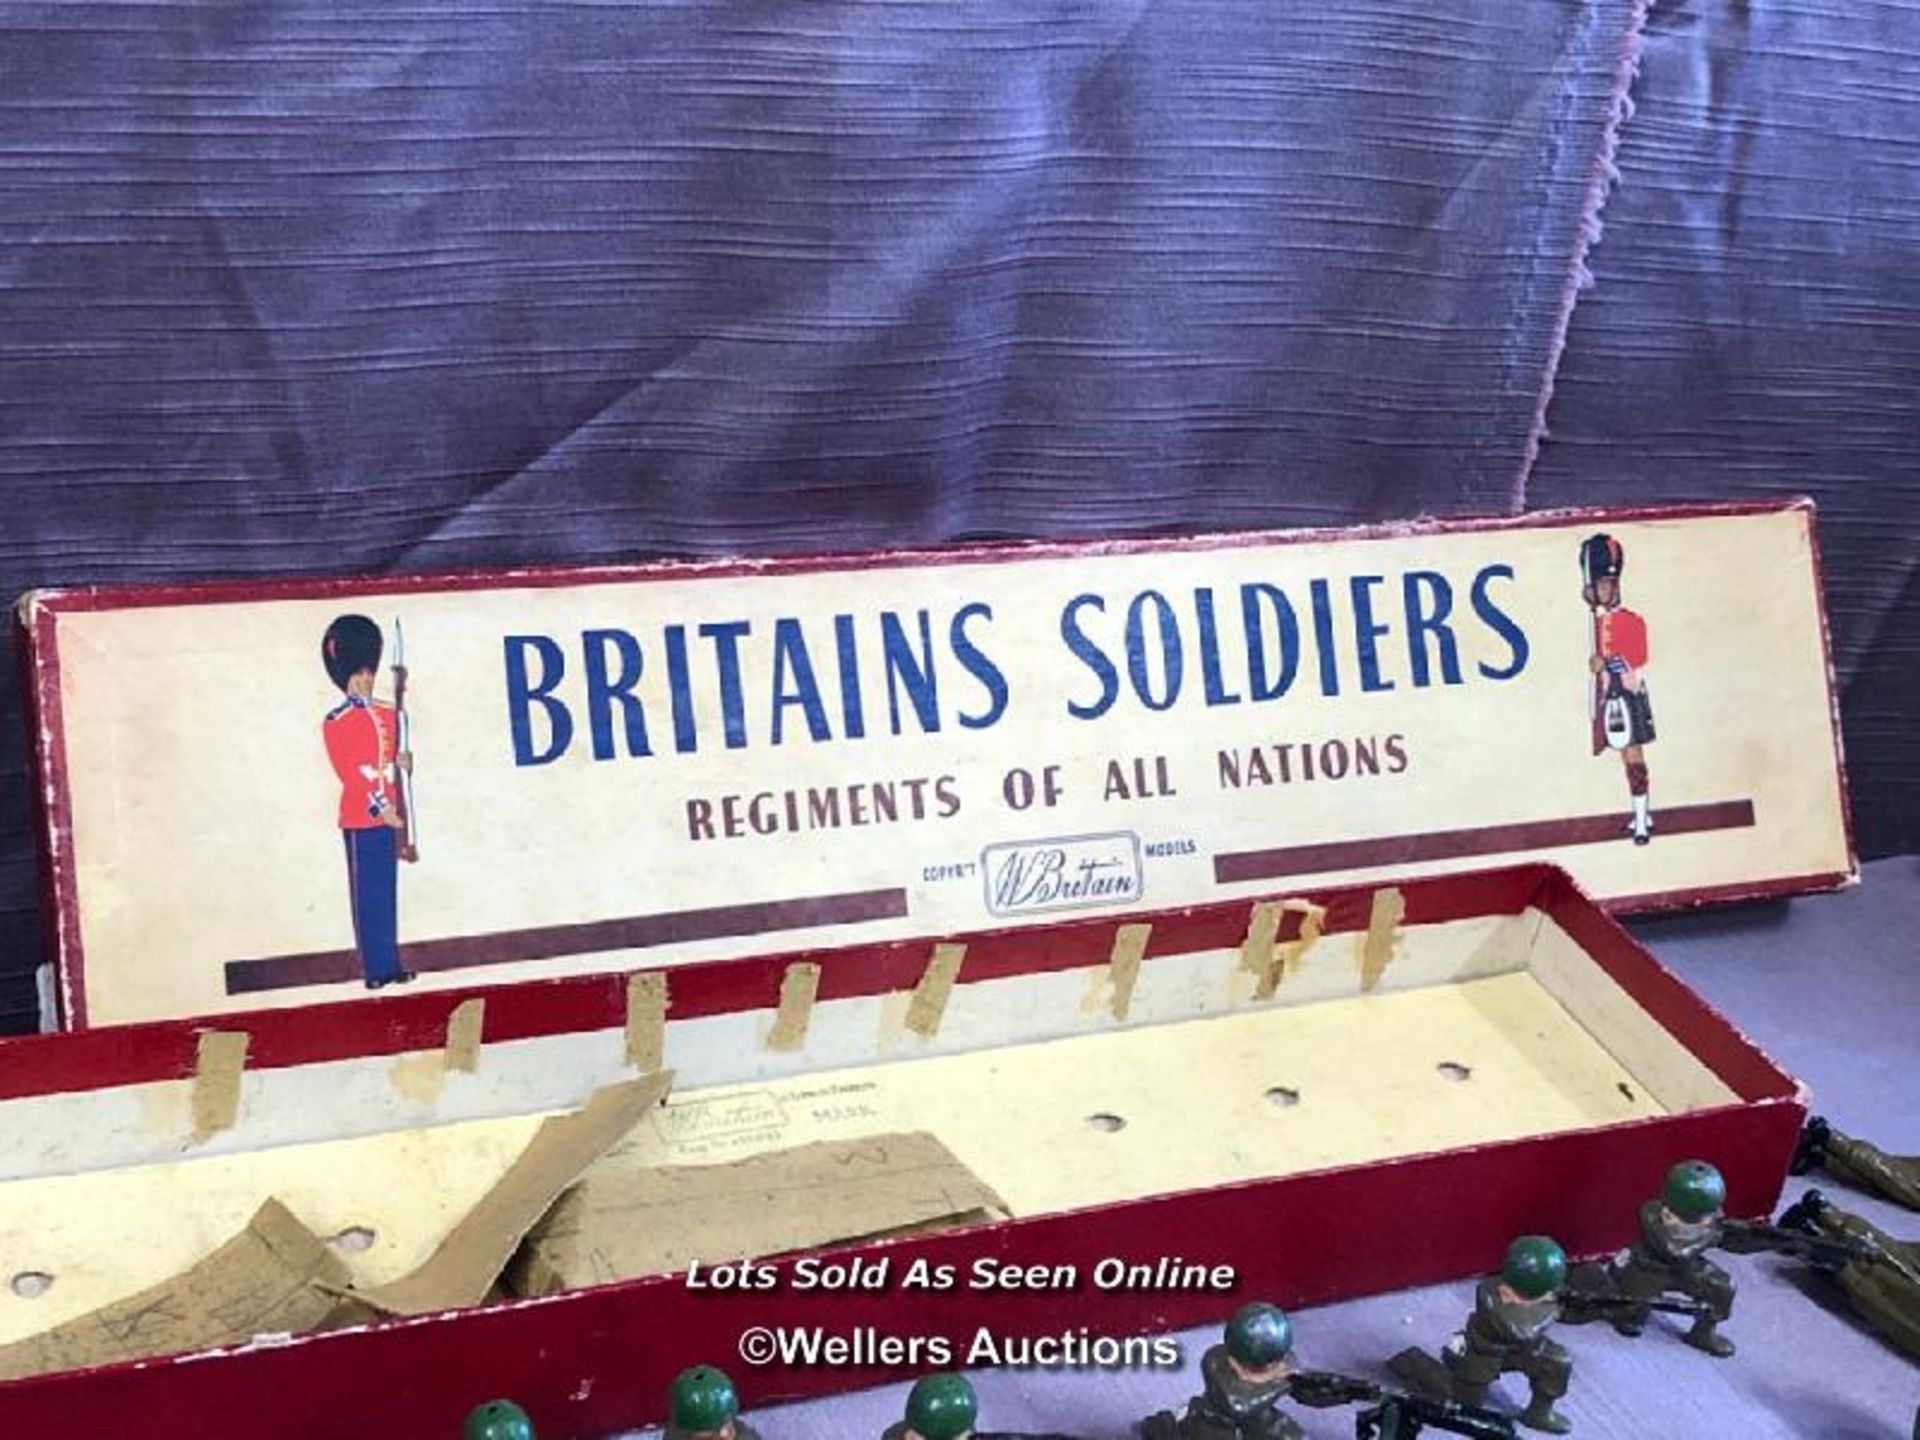 BRITAINS SOLDIERS REGIMENTS OF ALL NATIONS, WITH A NON MATCHING BOX NO. 2063 THE ARGYLL AND - Bild 6 aus 6